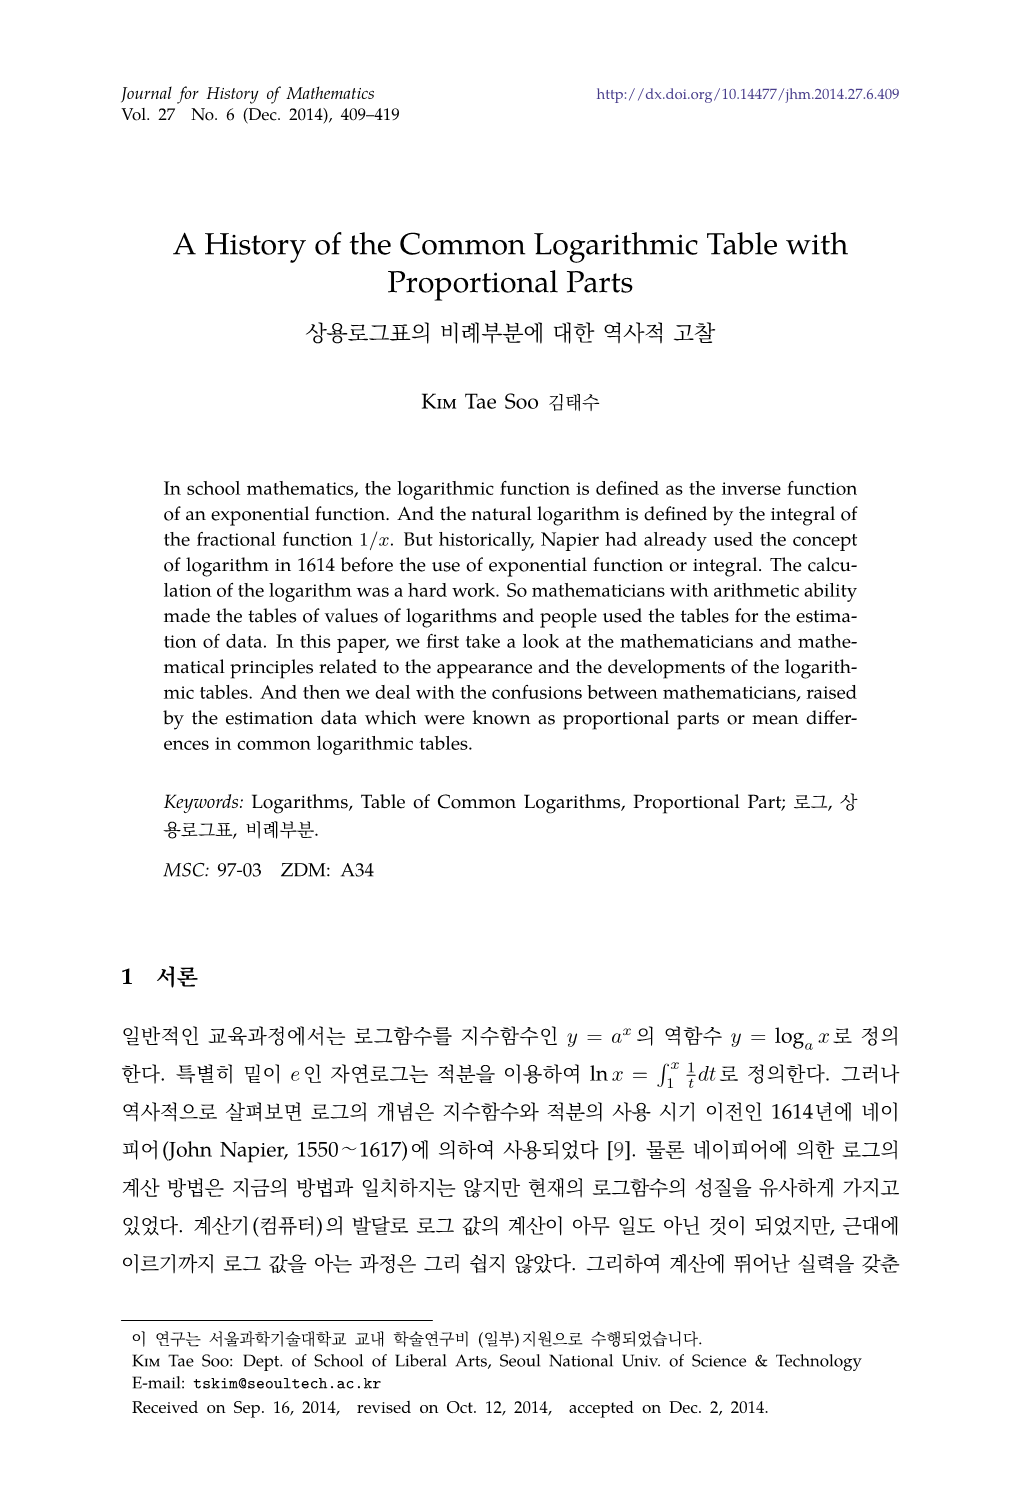 A History of the Common Logarithmic Table with Proportional Parts 상용로그표의 비례부분에 대한 역사적 고찰